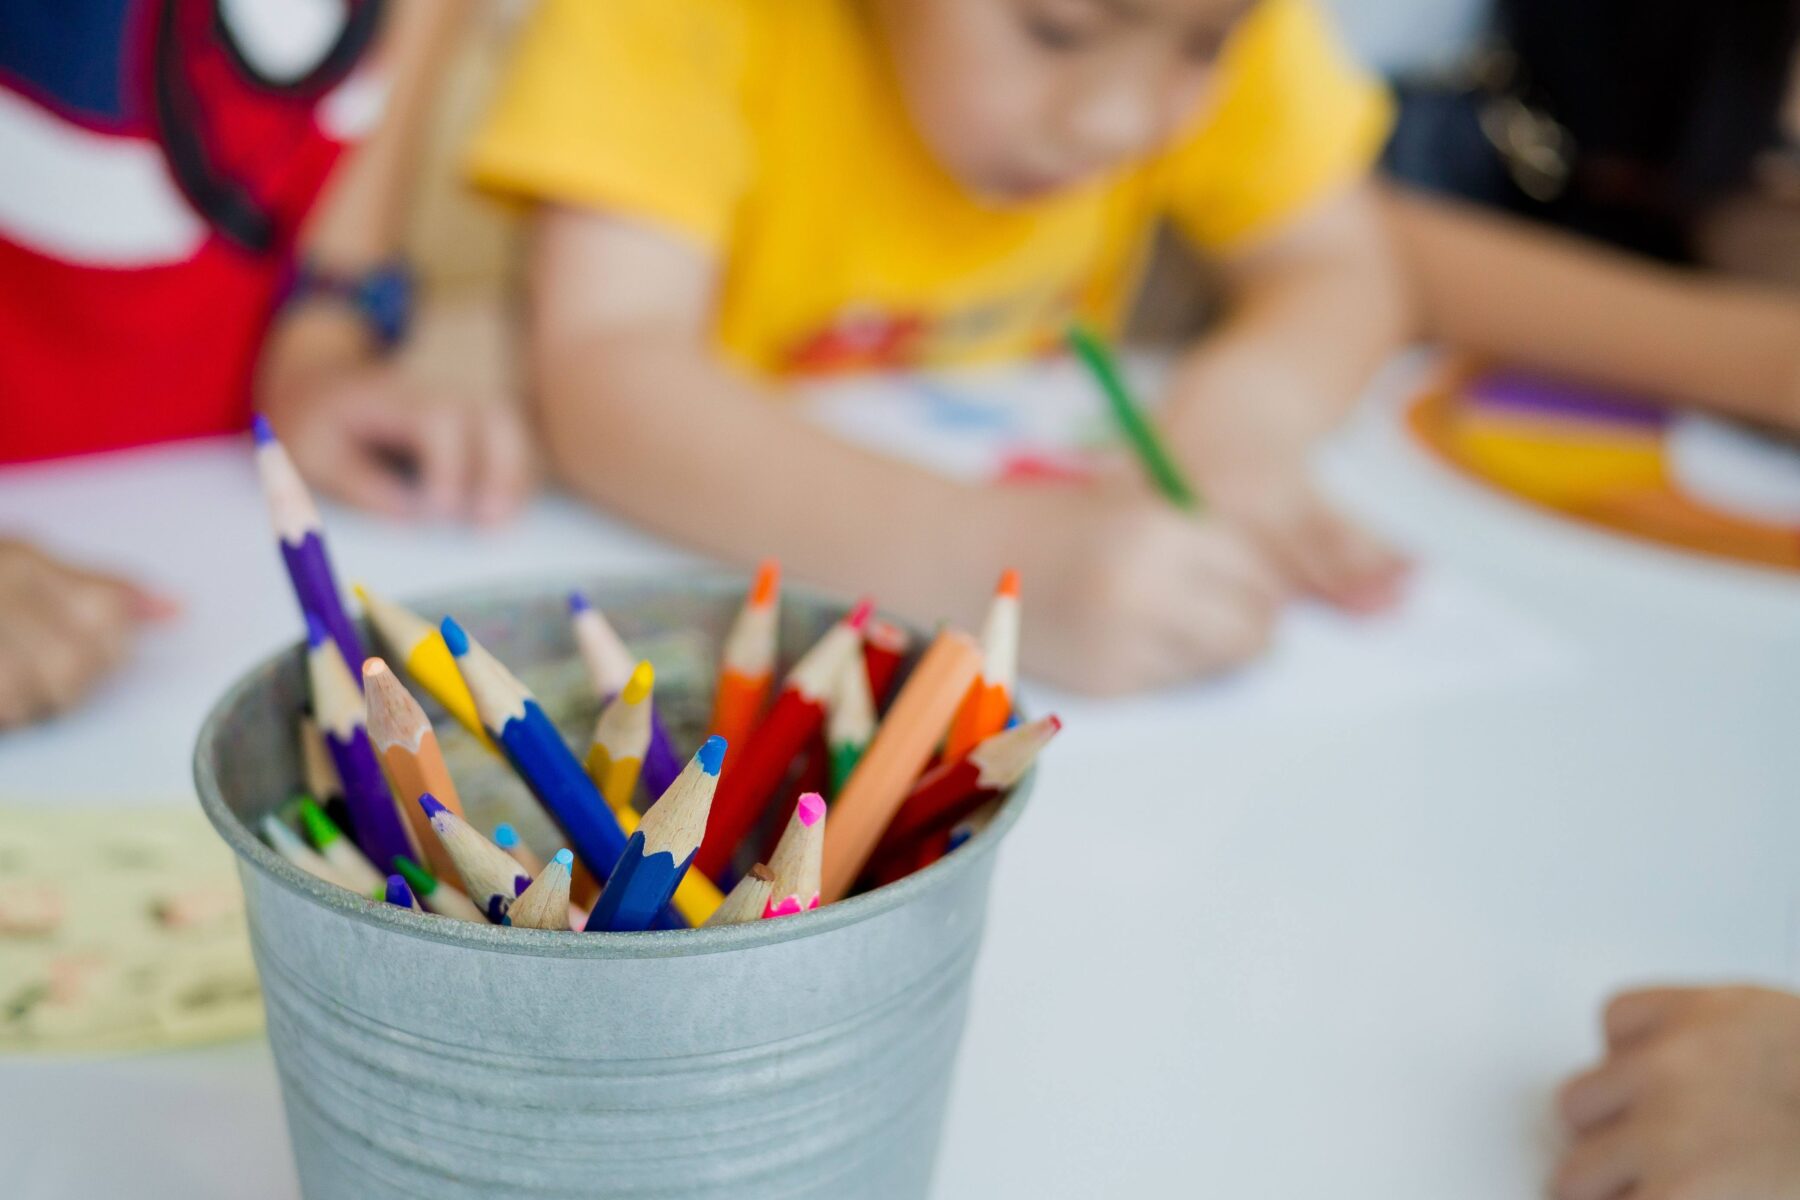 A bucket of colored pencils sitting on a desk, children drawing in the background